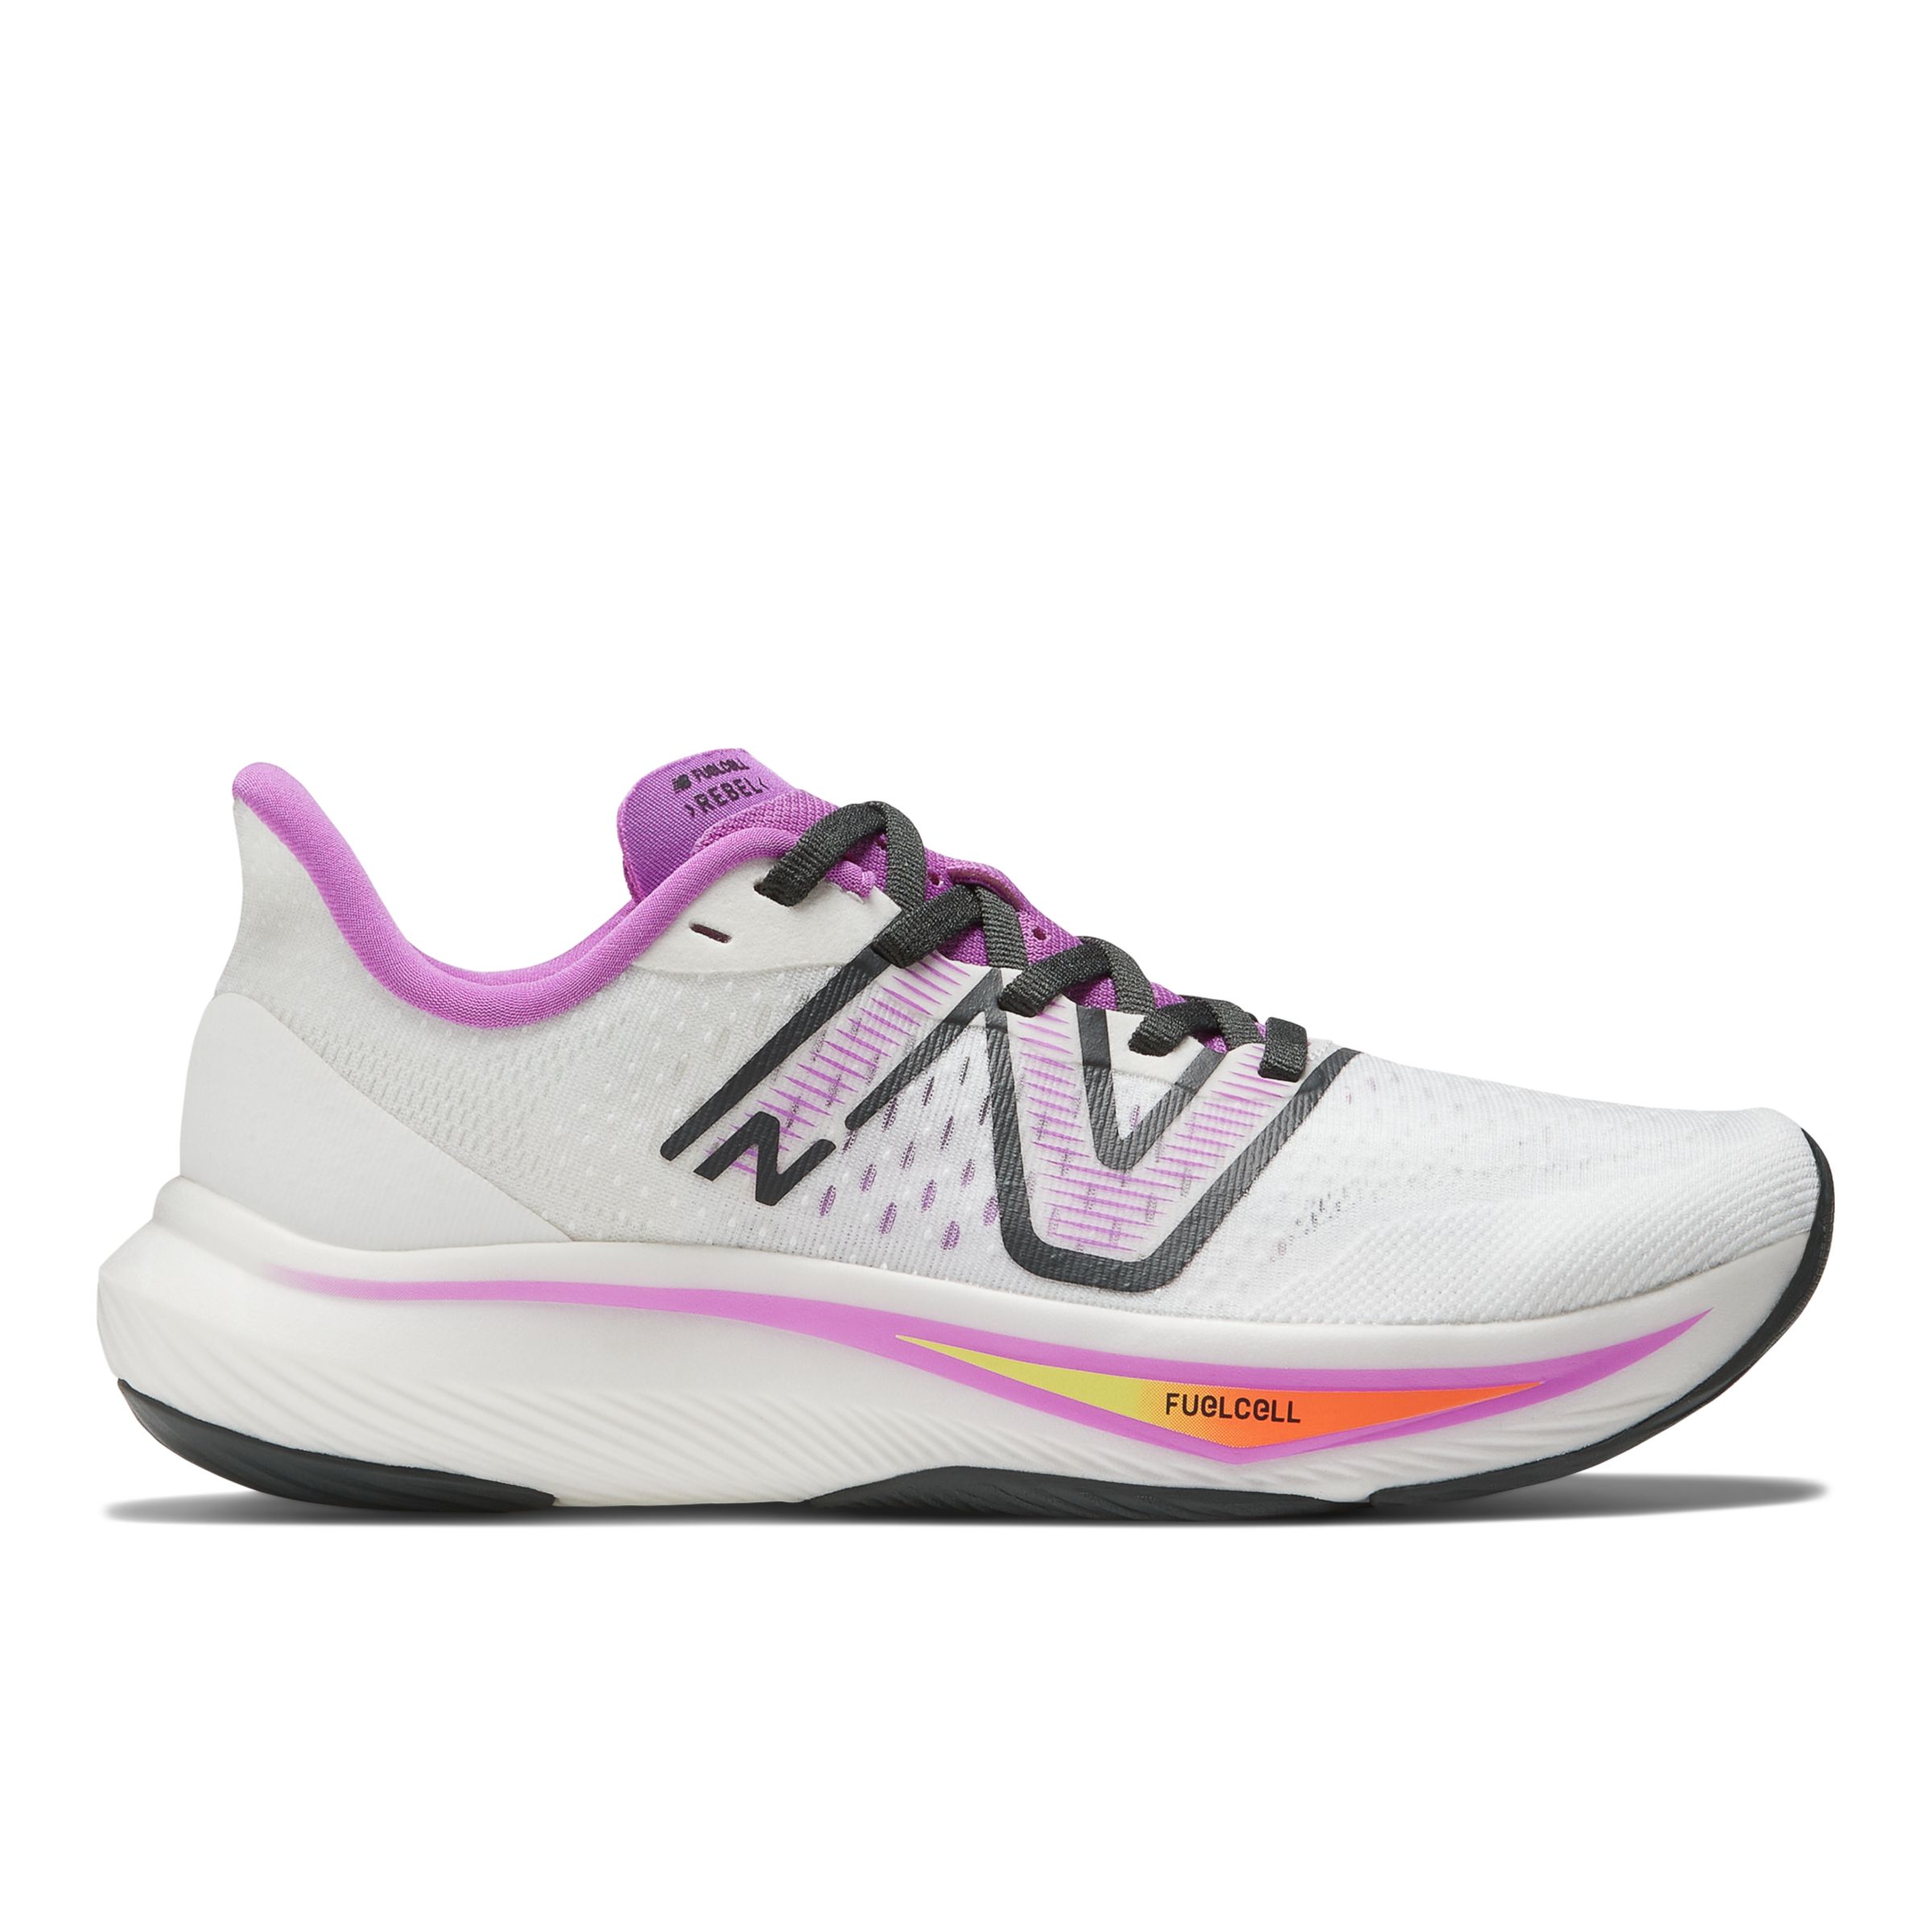 New Balance Femme FuelCell Rebel v3 en Blanc/Rose/Gris, Synthetic, Taille 42.5